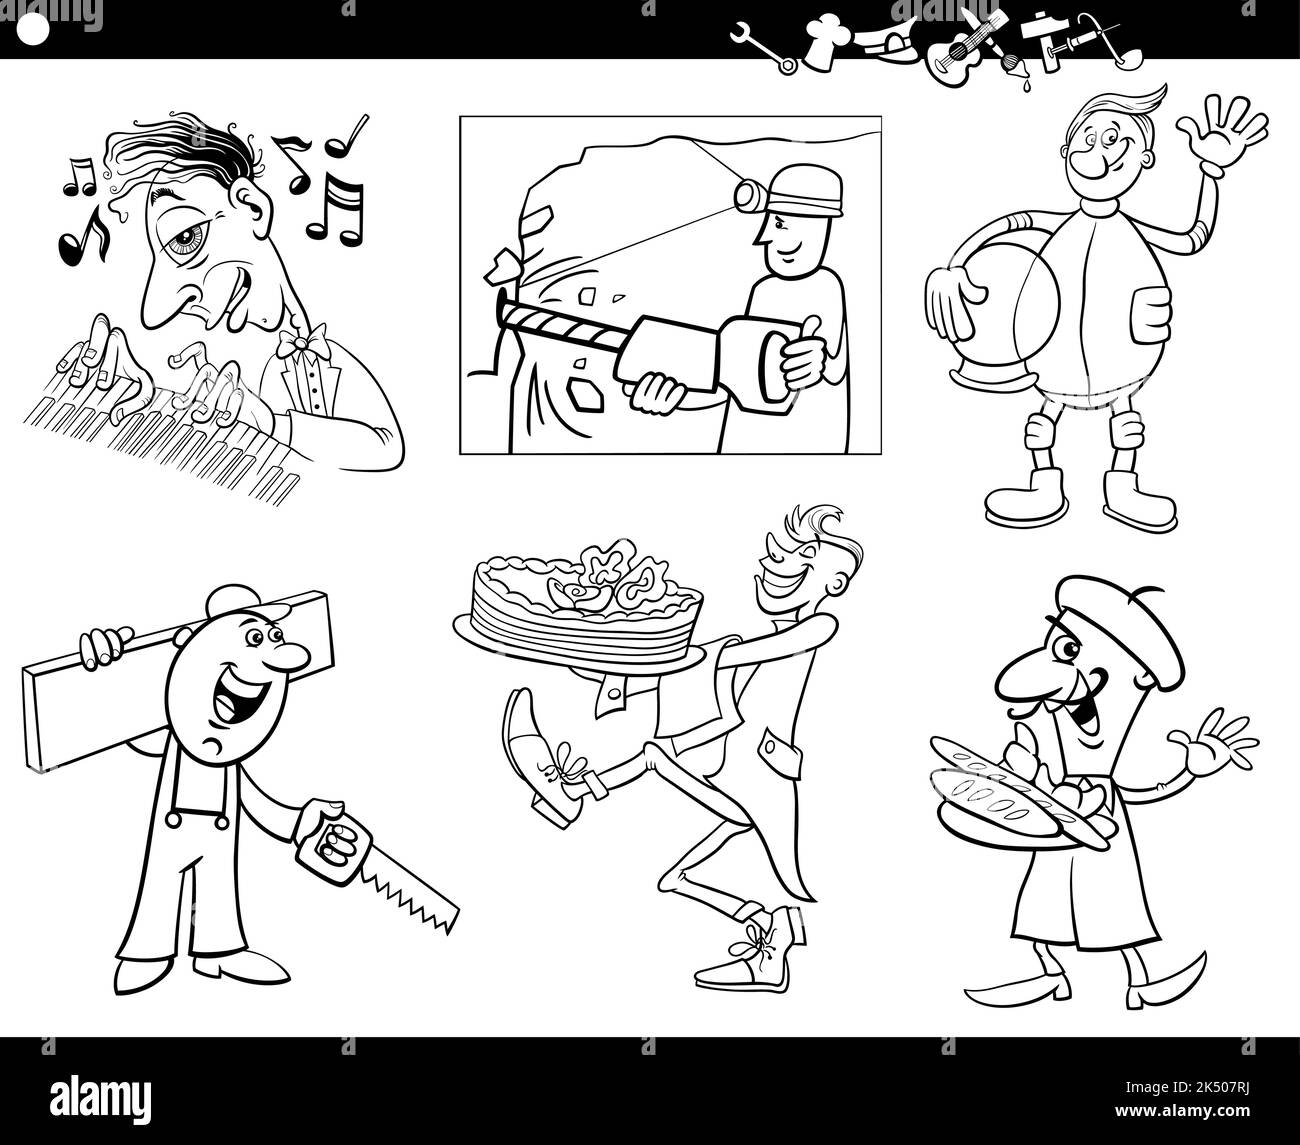 Black and white cartoon illustration of professional people occupations comic characters set coloring page Stock Vector